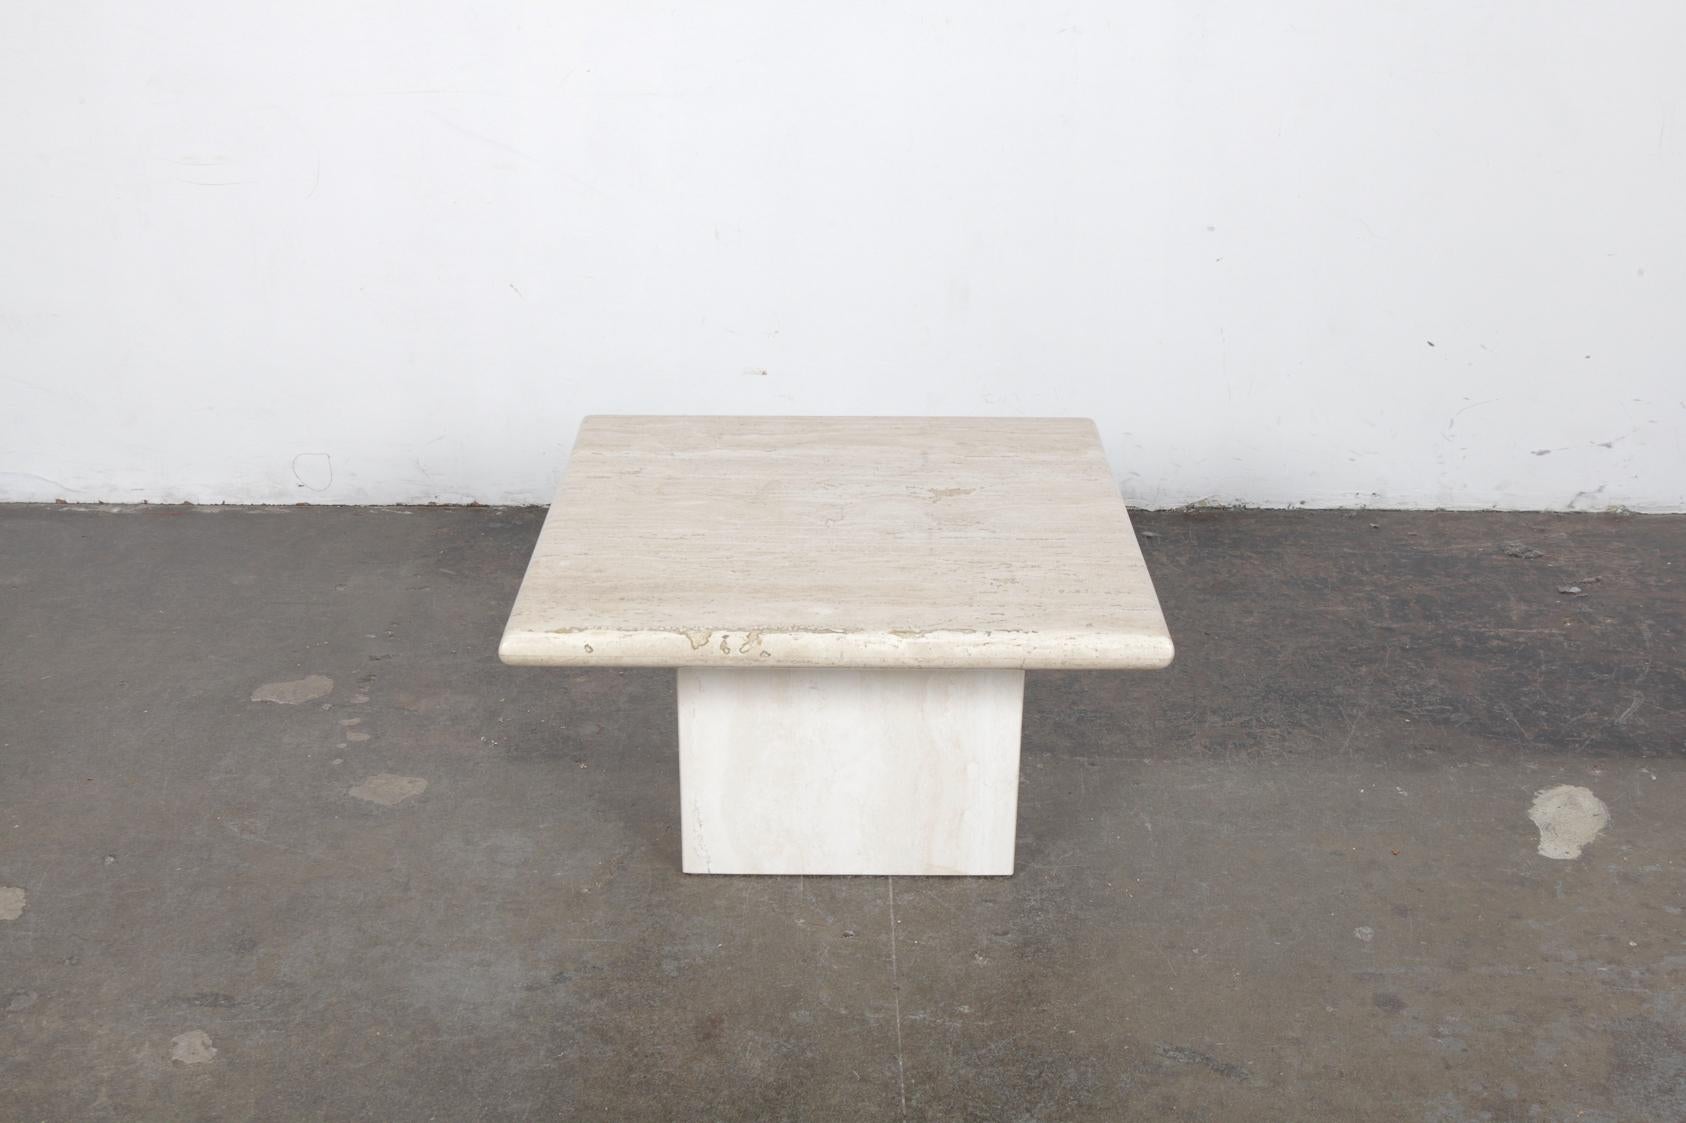 Beautiful Italian travertine end table, 1970s, with a square pedestal base and a slight beveled edge to the tabletop. In very nice vintage condition.